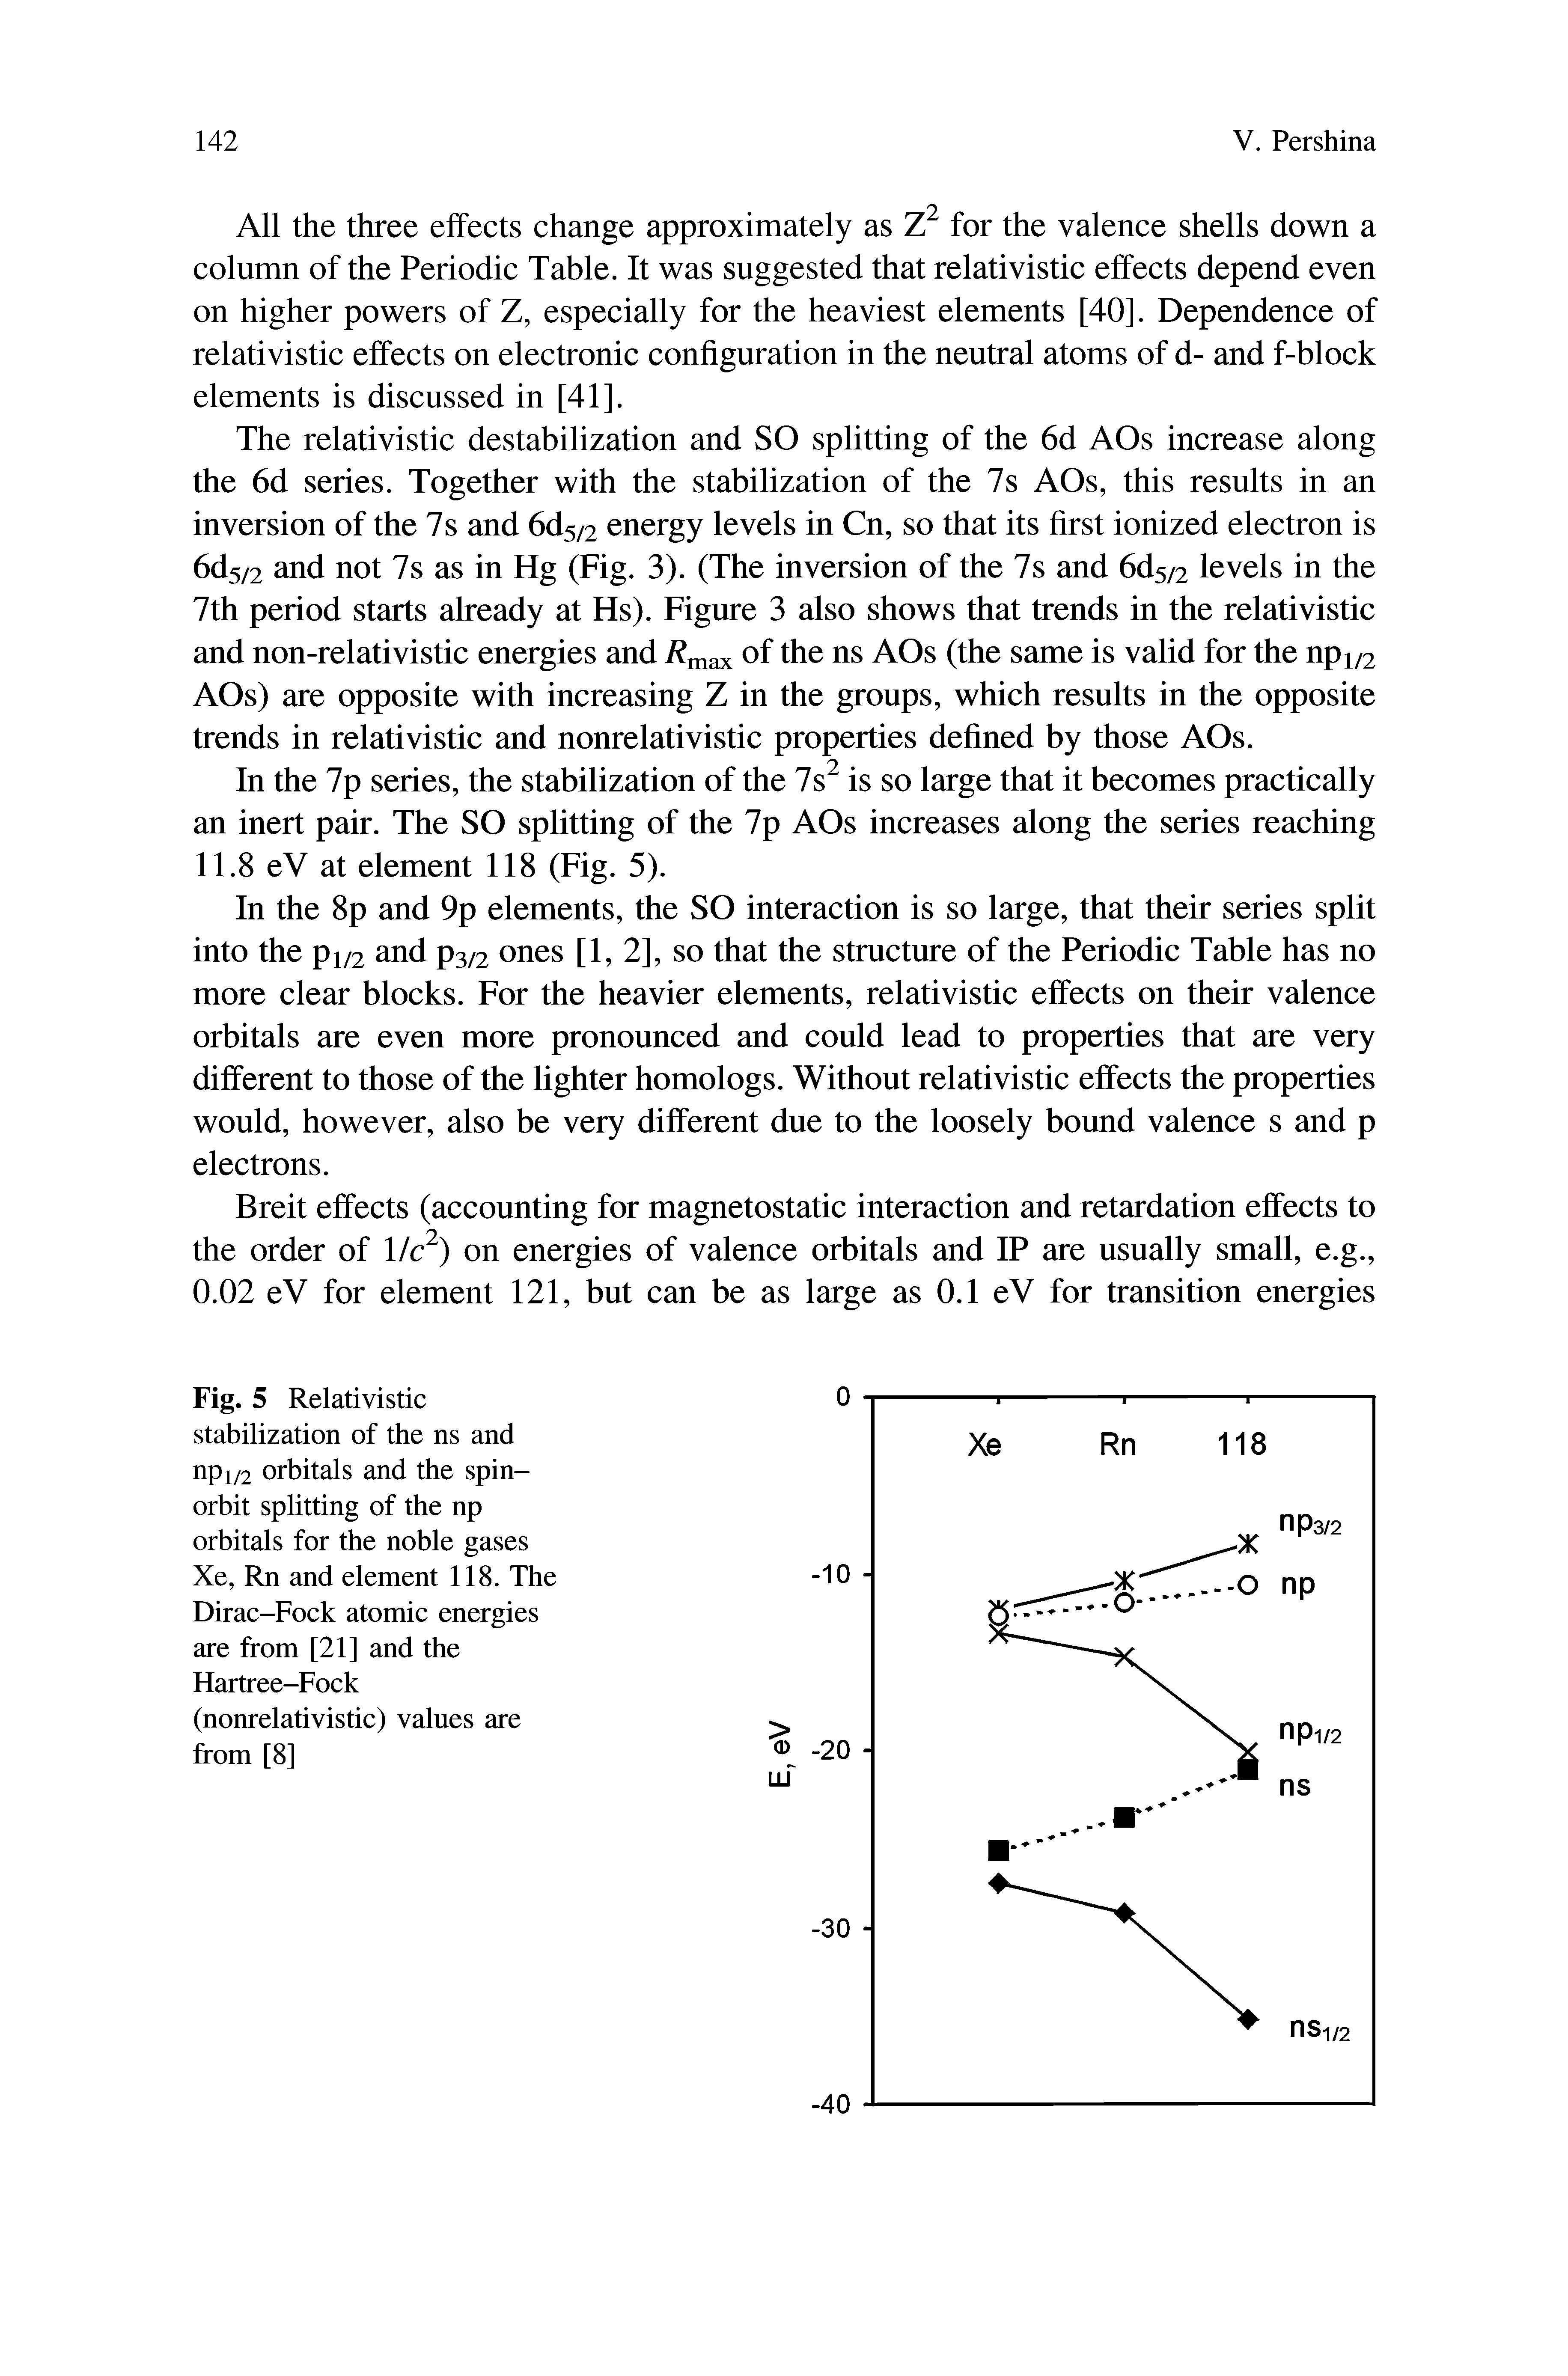 Fig. 5 Relativistic stabilization of the ns and npi/2 orbitals and the spin-orbit splitting of the np orbitals for the noble gases Xe, Rn and element 118. The Dirac-Fock atomic energies are from [21] and the Hartree-Fock (nonrelativistic) values are from [8]...